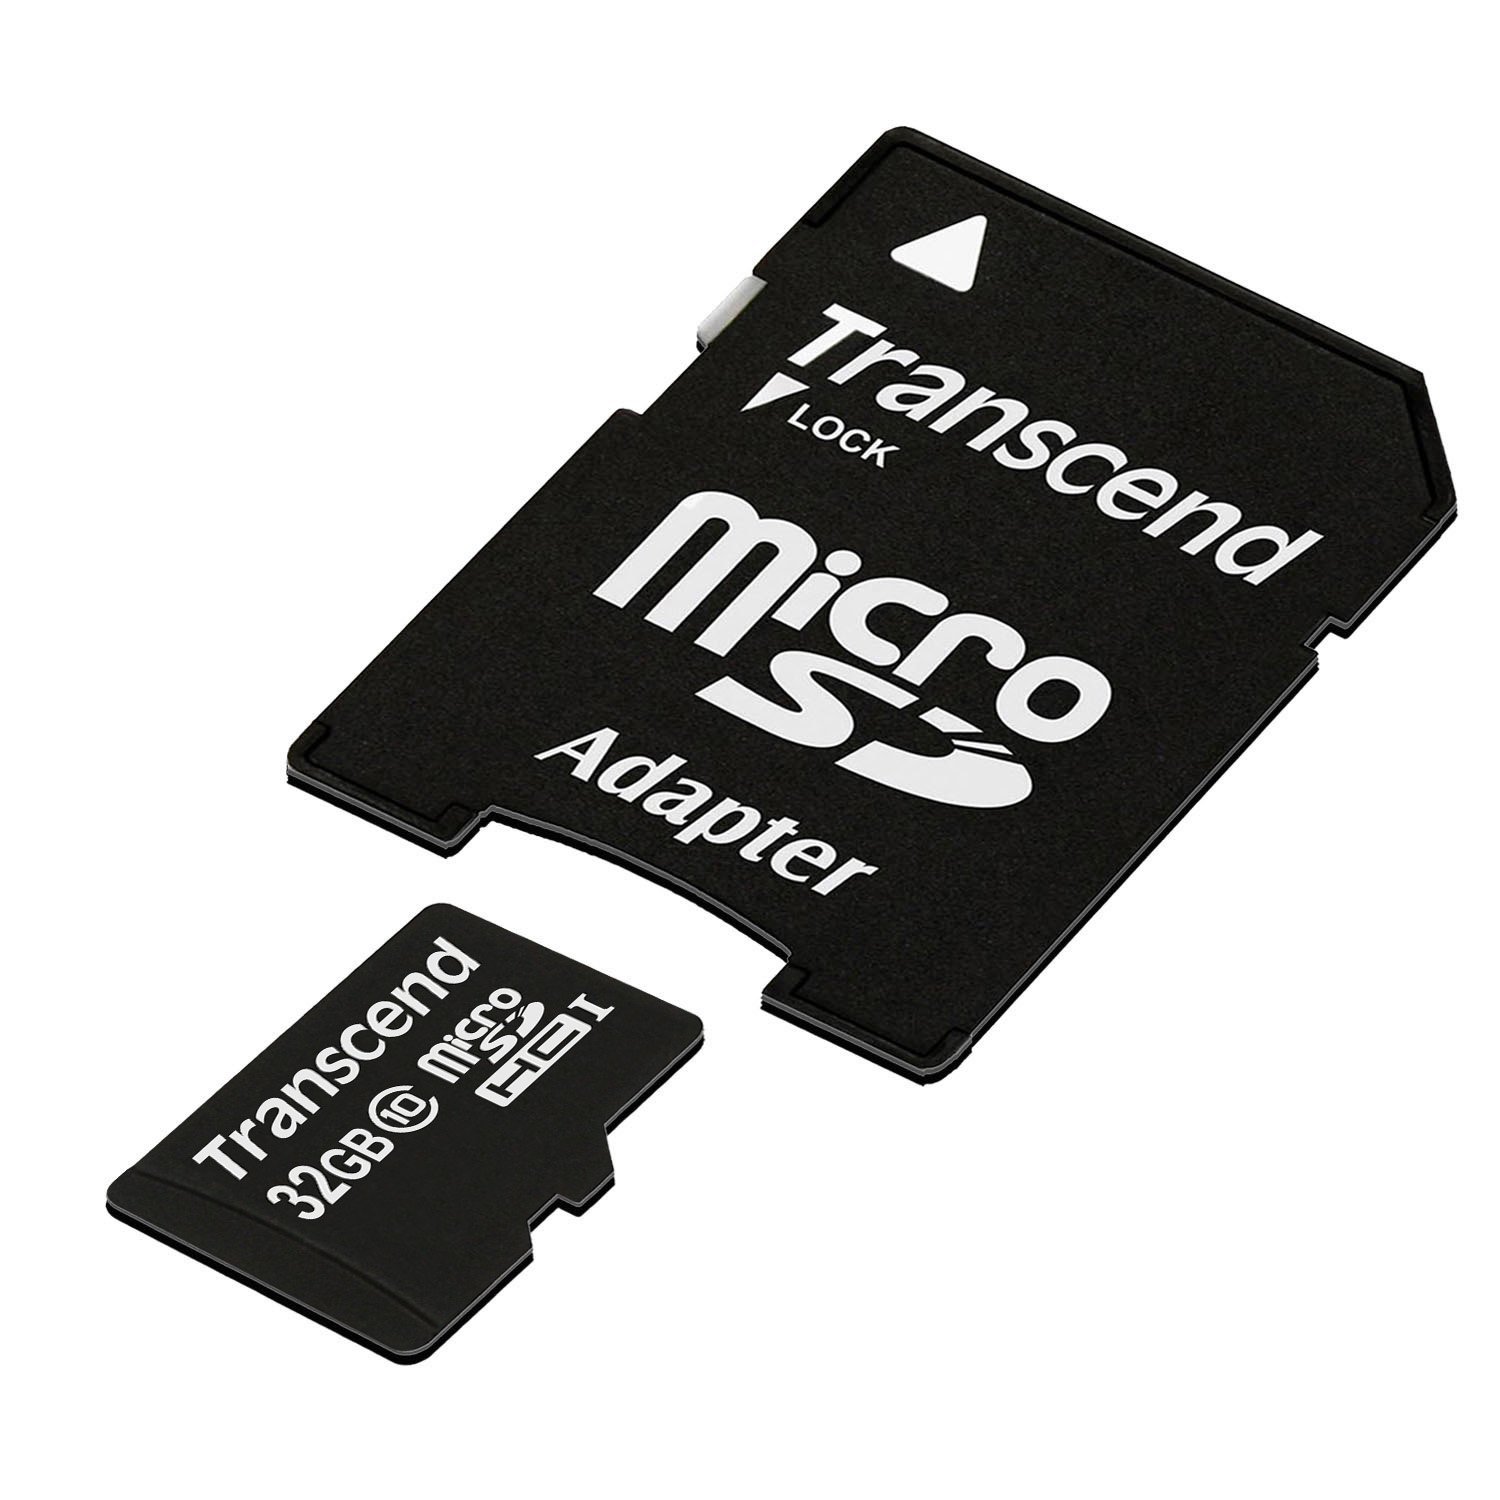 Transcend 32GB MicroSDHC Class10 Memory Card with Adapter 30 MB/s (TS32GUSDHC10) - image 1 of 3